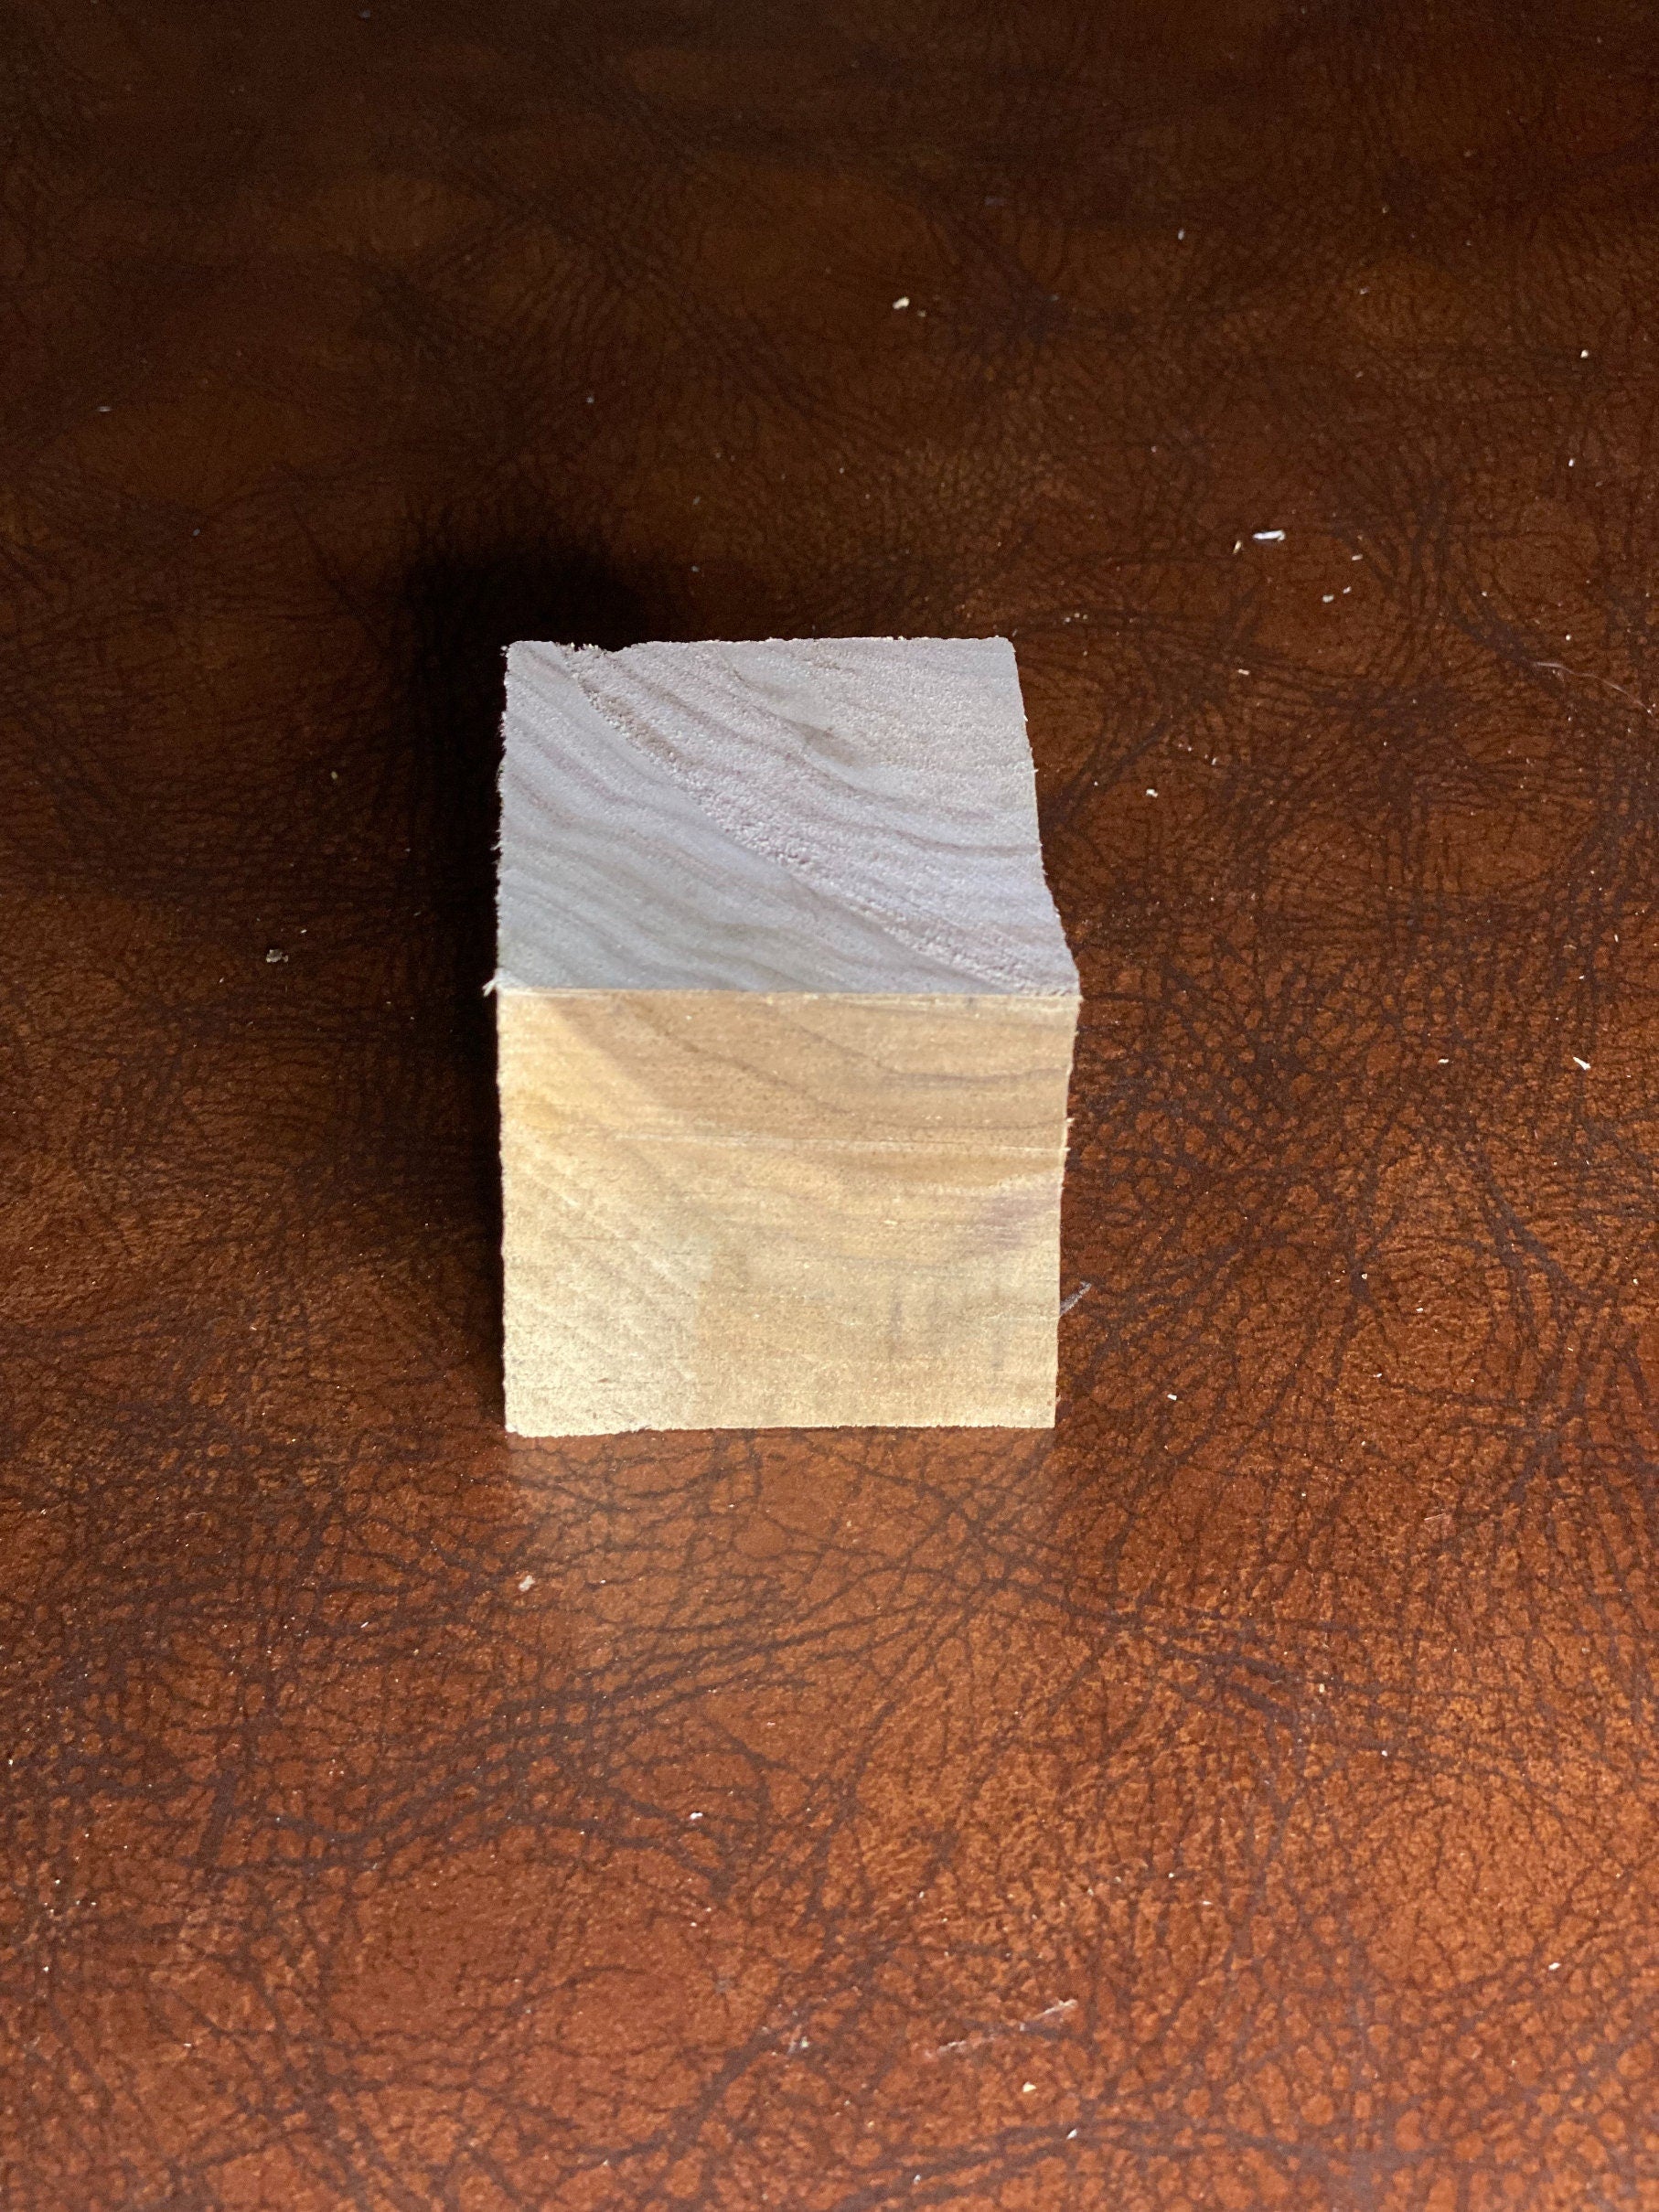 Black Walnut Cube, Approximately 2.5 Inches Long by 2.25 Inches Wide by 2.25 Inches High